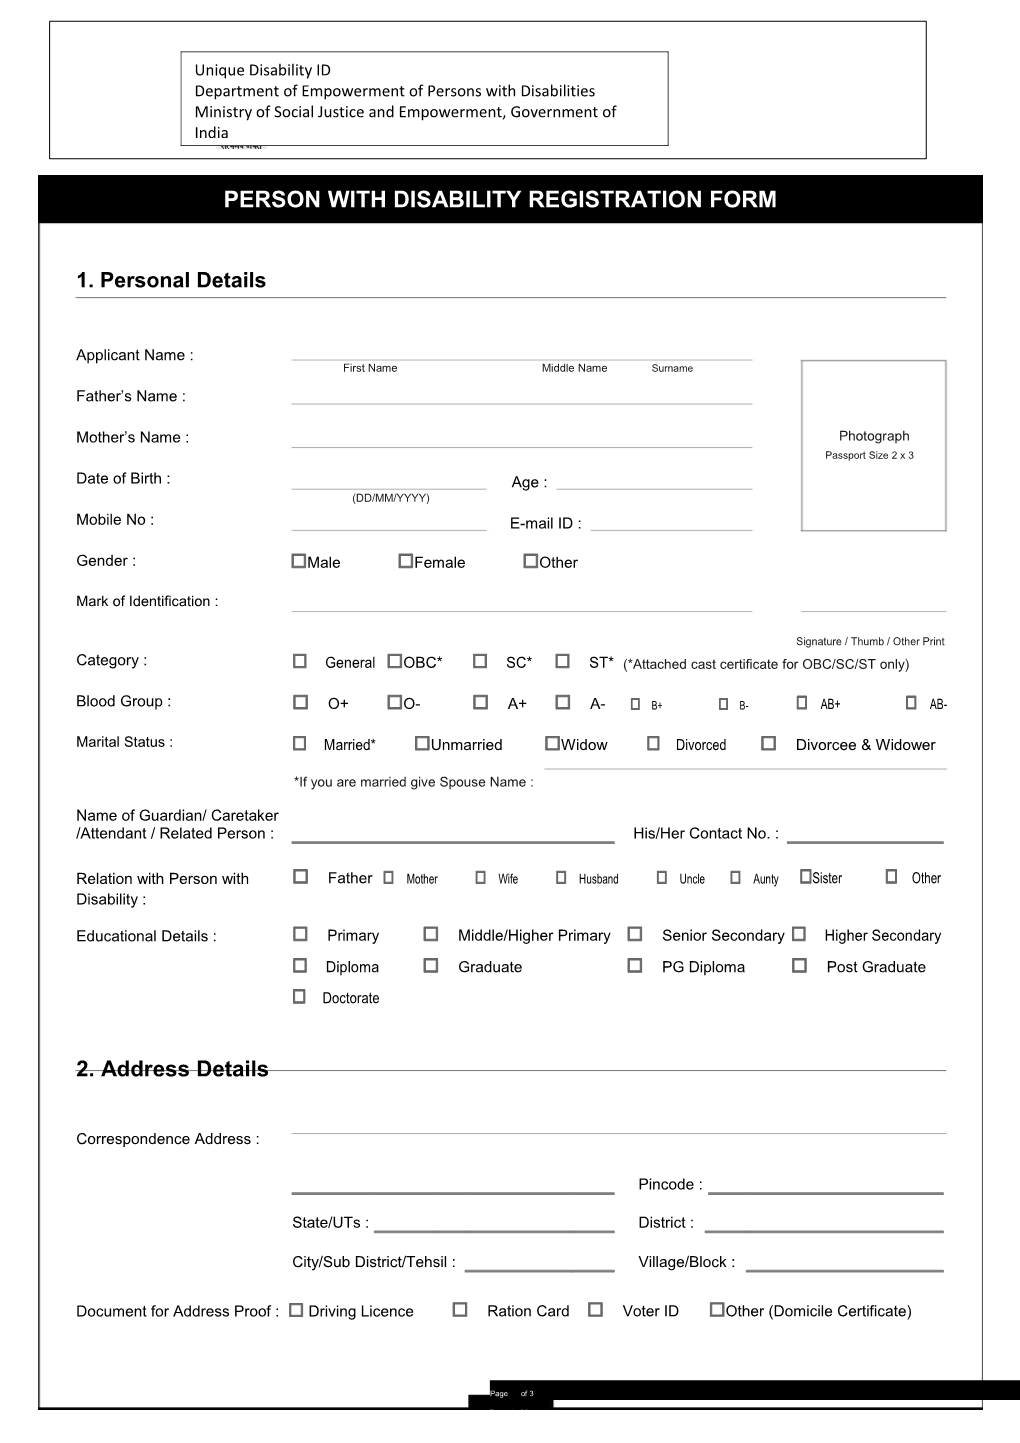 Person with Disability Registration Form